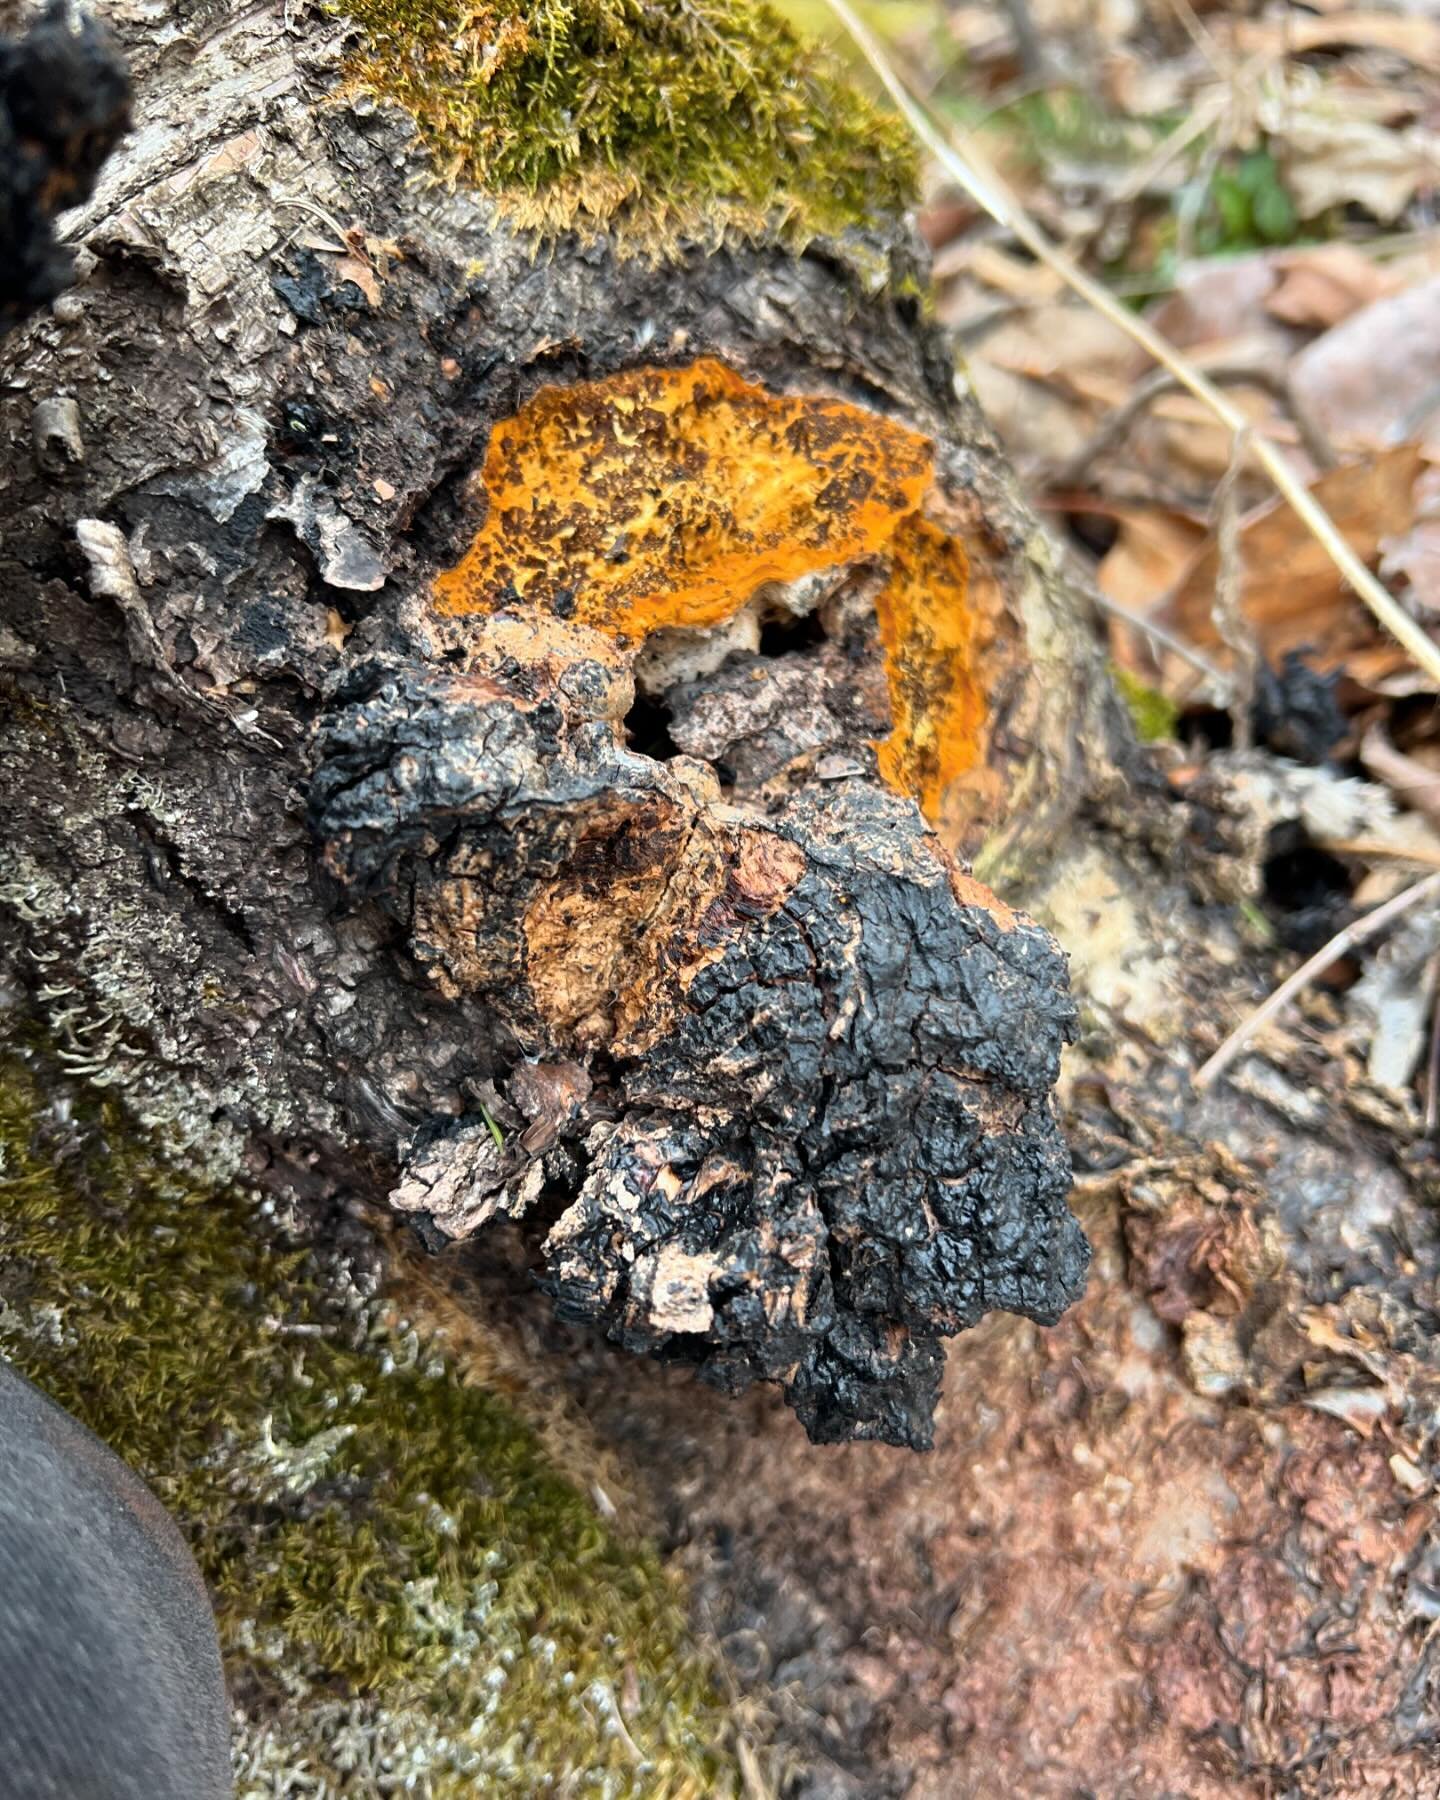 Foraging find! We spotted some local Chaga (with the help of available @hopeanimalshelter dog Sweetie and an ID confirmation from @inspired.north)! Chaga is a fungi that is parasitic to Birch trees and grows in only in a narrow latitude range of cold